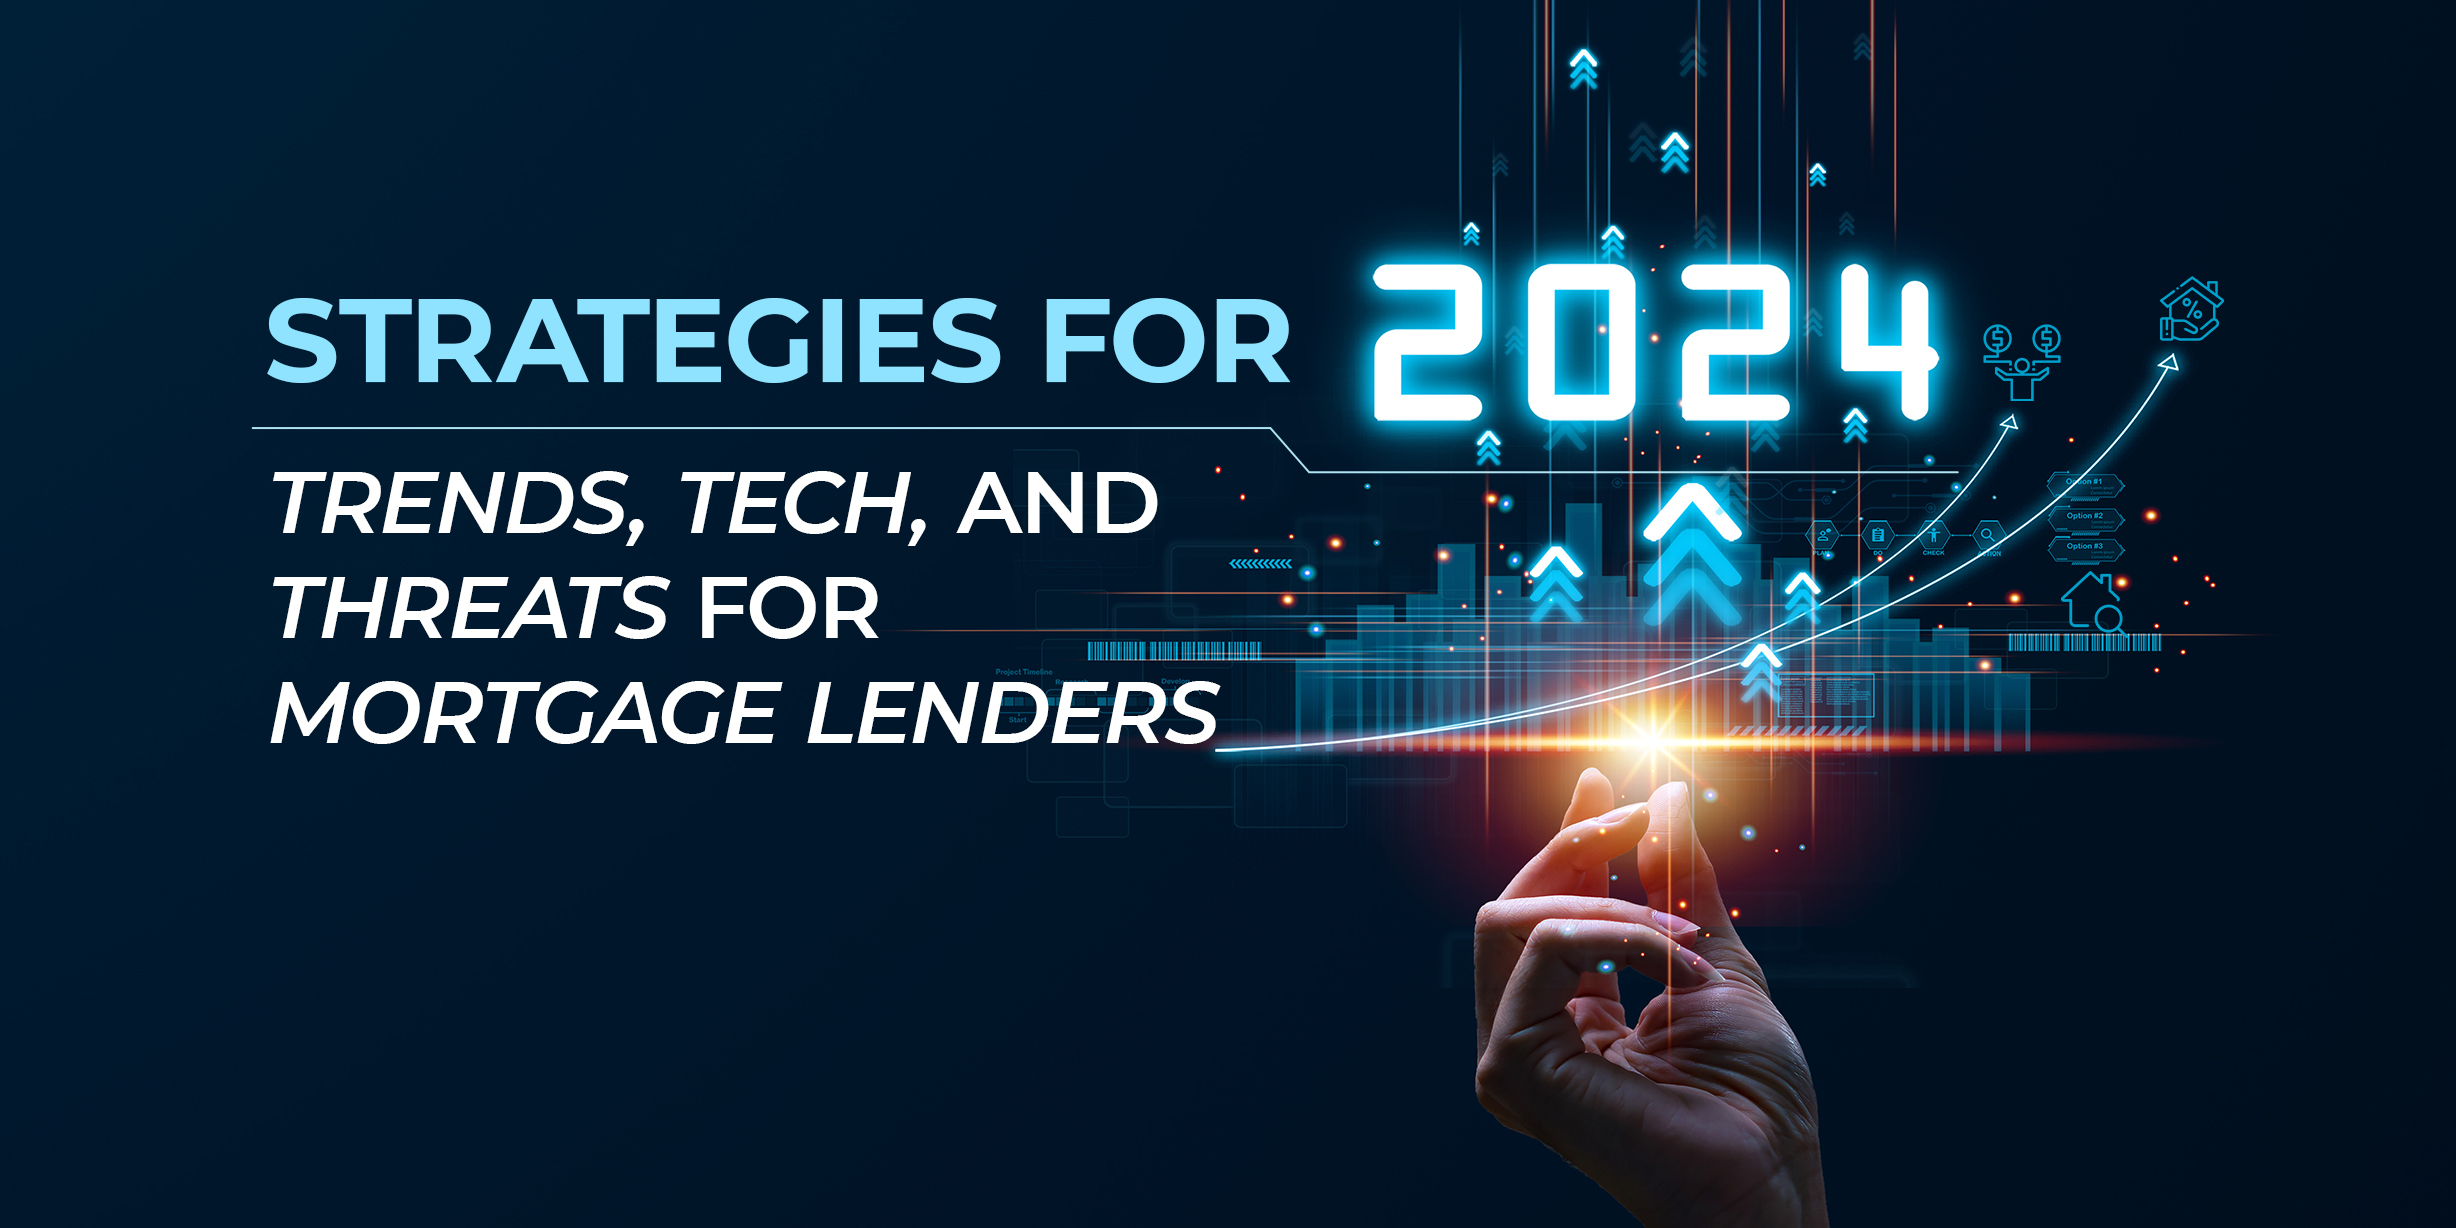 Strategies for 2024: Trends, Tech, and Threats for Mortgage Lenders